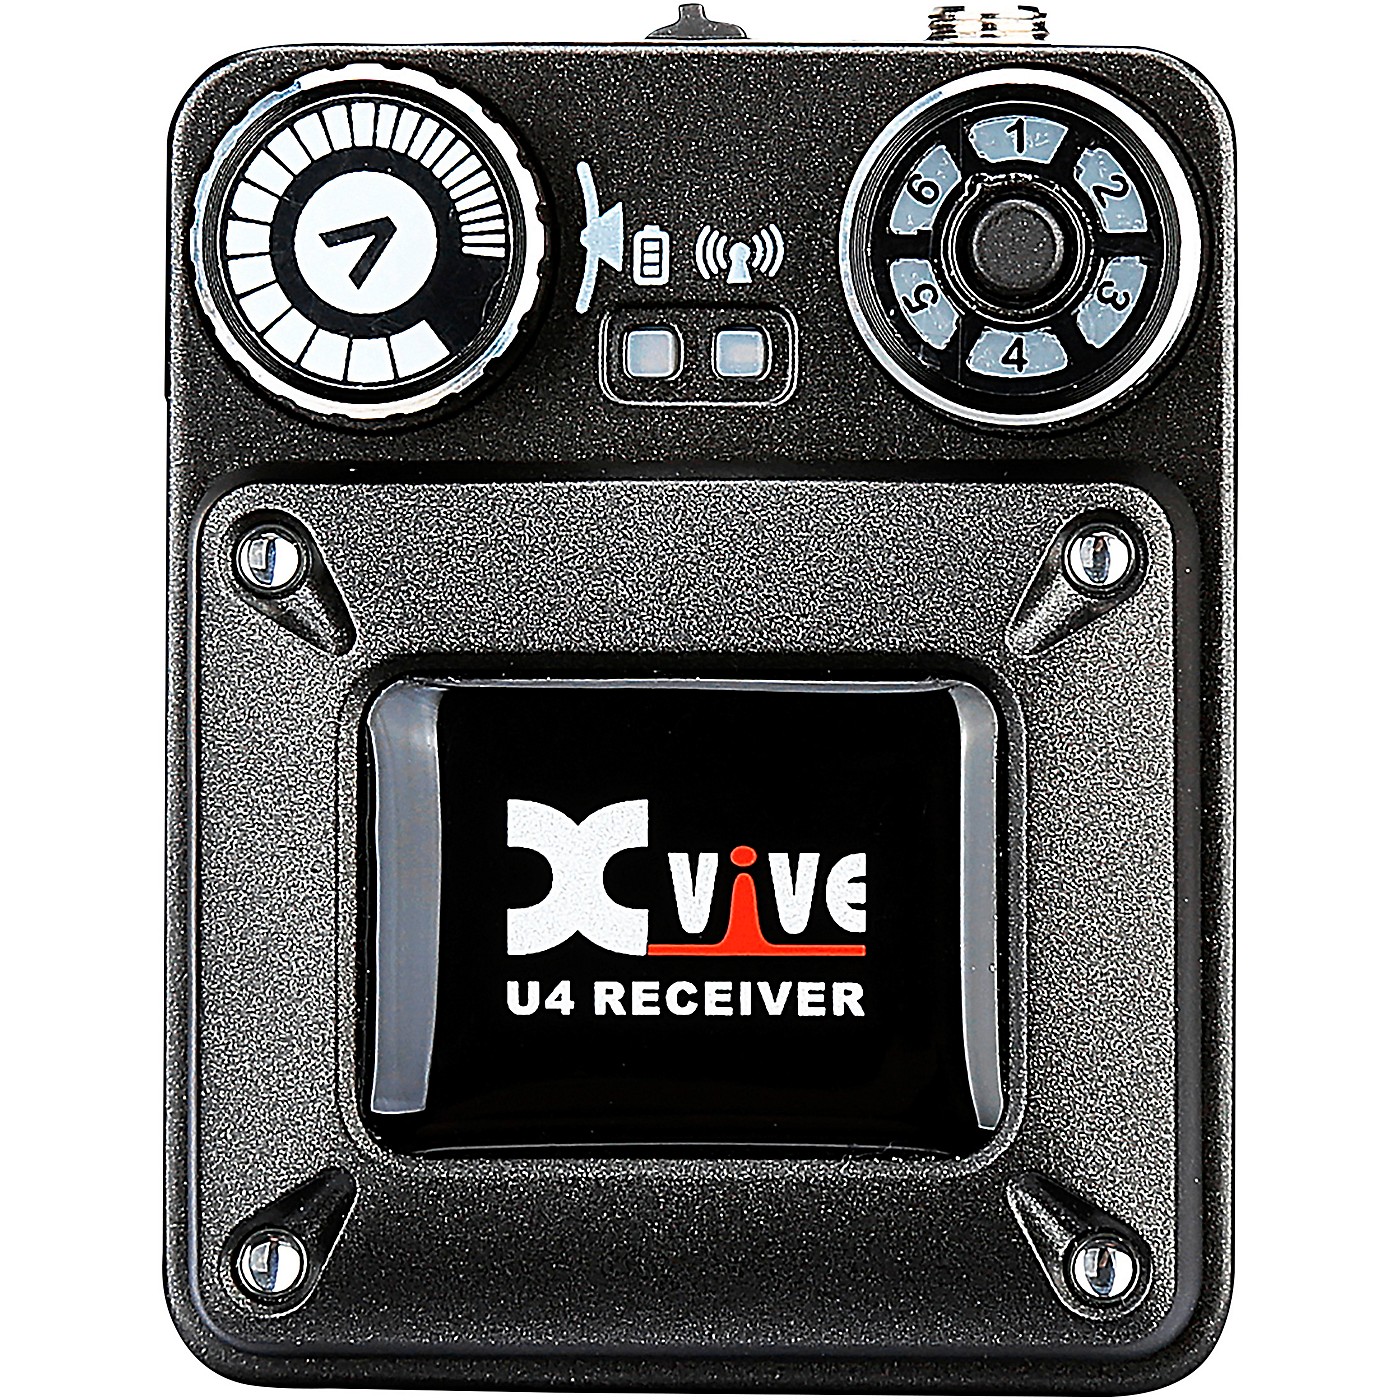 XVive U4R In-Ear Monitor Wireless System Receiver Only thumbnail